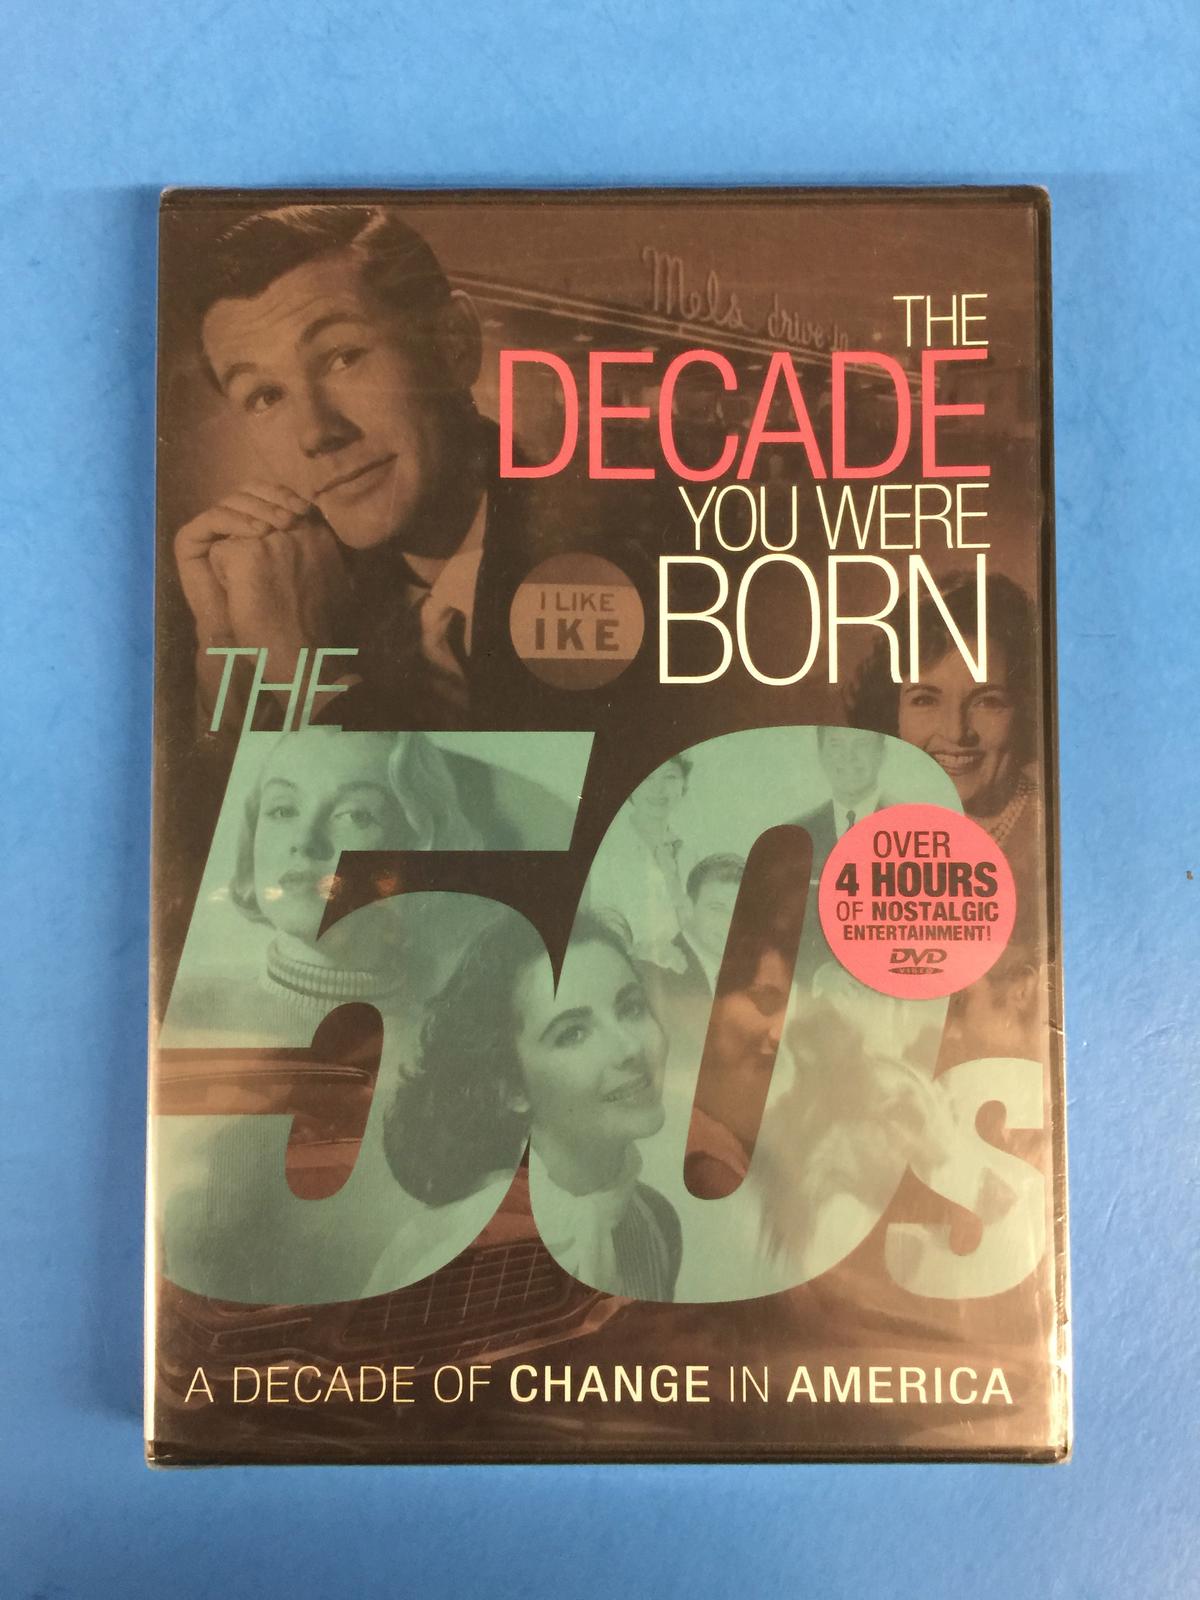 BRAND NEW SEALED The Decade You Were Born (1950's) 4 Hours of Nostalgic Entertainment DVD